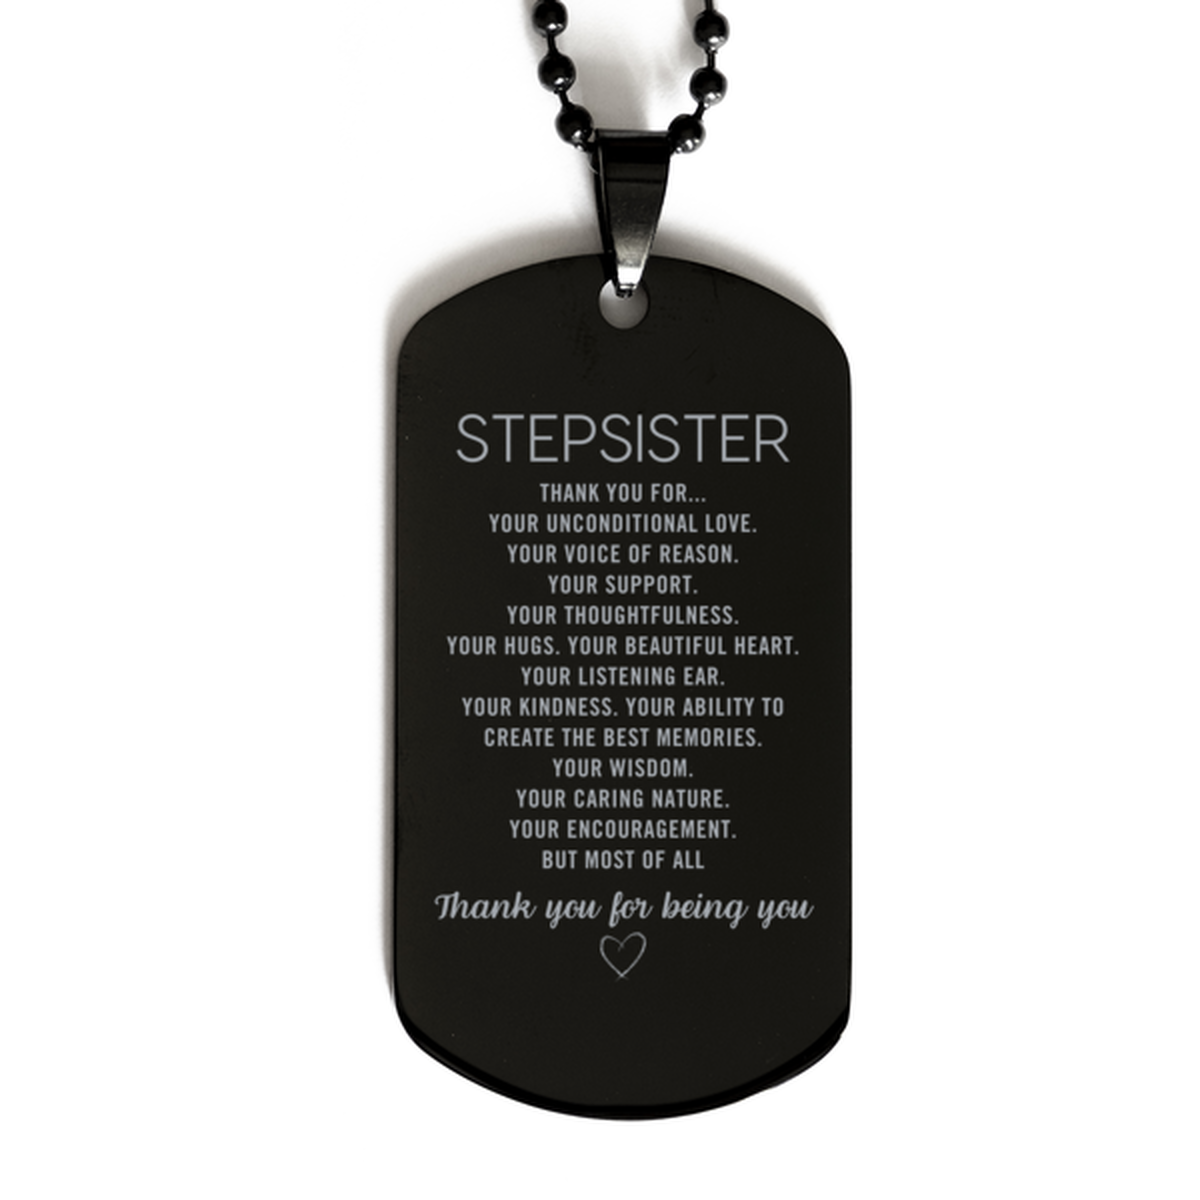 Stepsister Black Dog Tag Custom, Engraved Gifts For Stepsister Christmas Graduation Birthday Gifts for Men Women Stepsister Thank you for Your unconditional love